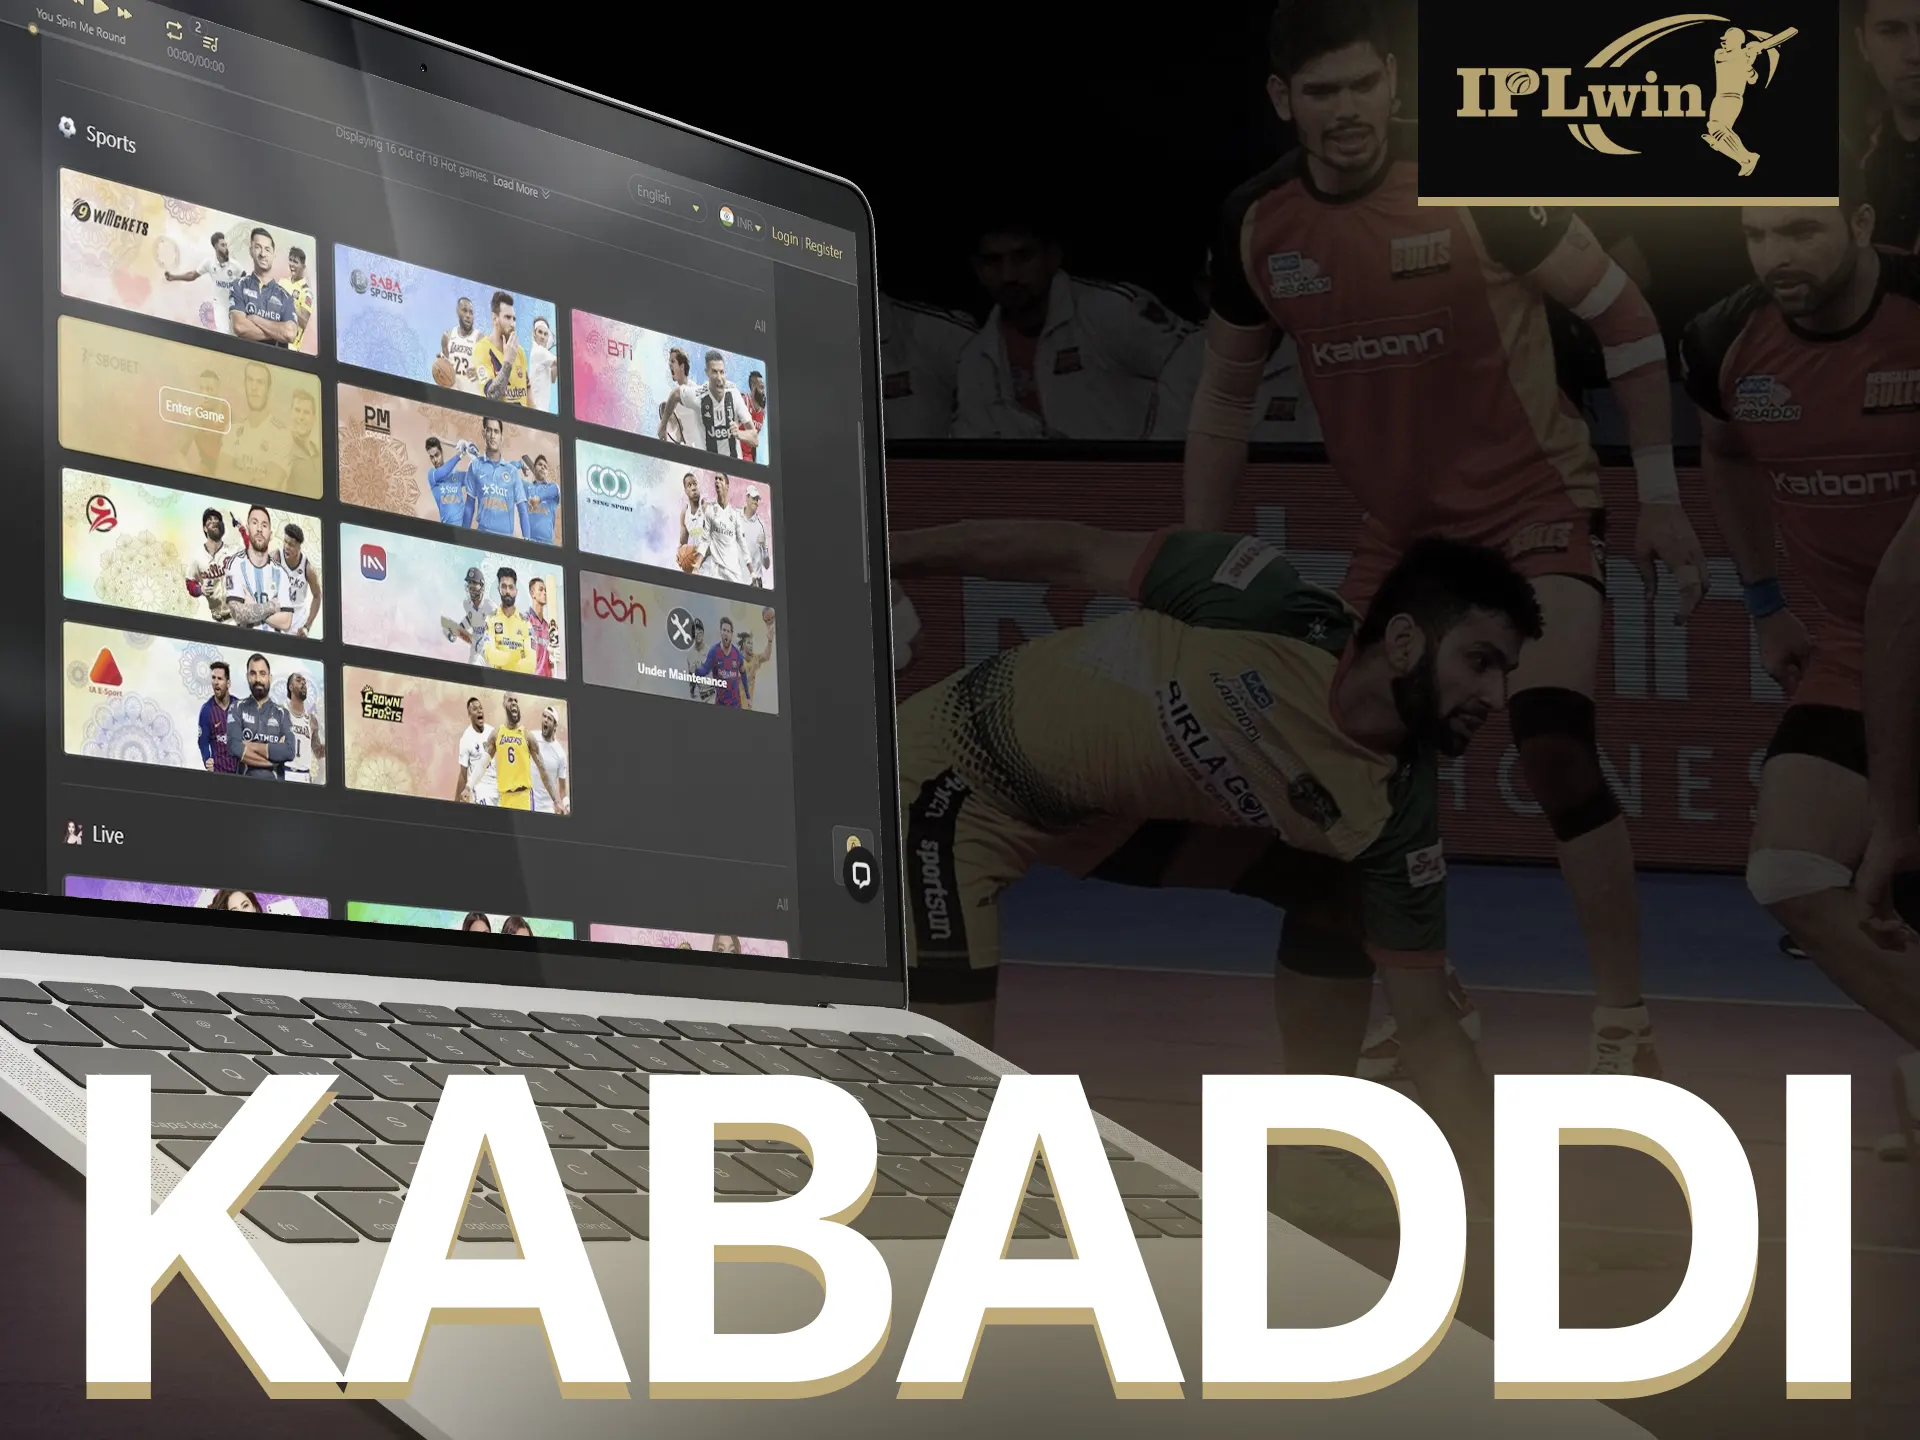 With IPLWIN, place your bets on kabaddi.